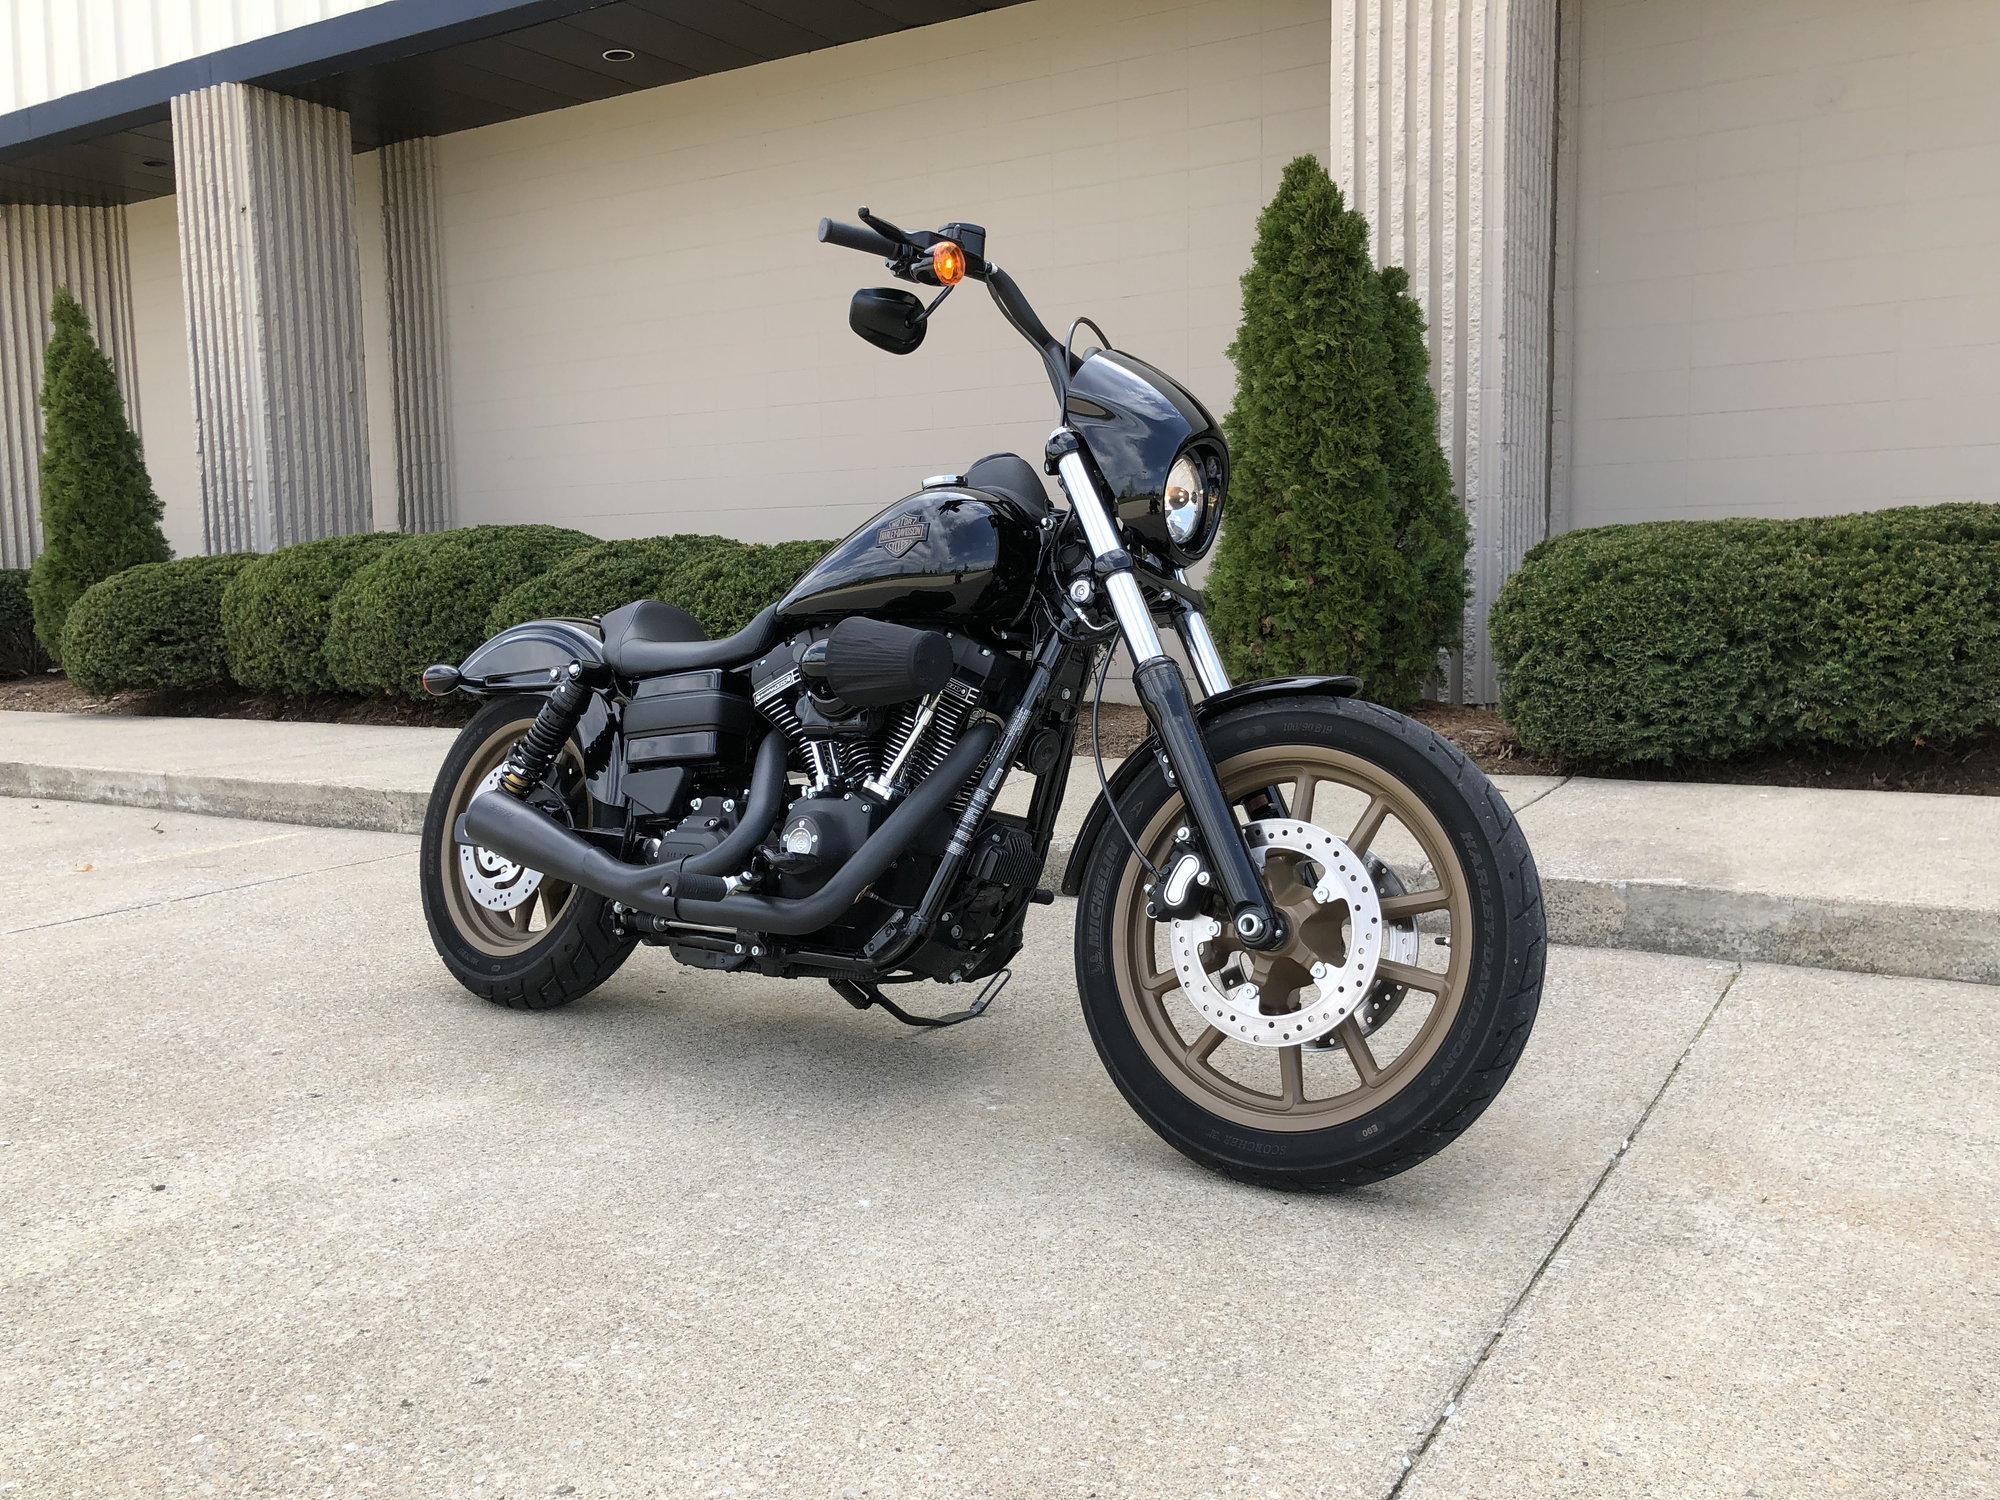 Best exhaust for low rider s - Page 2 - Harley Davidson Forums